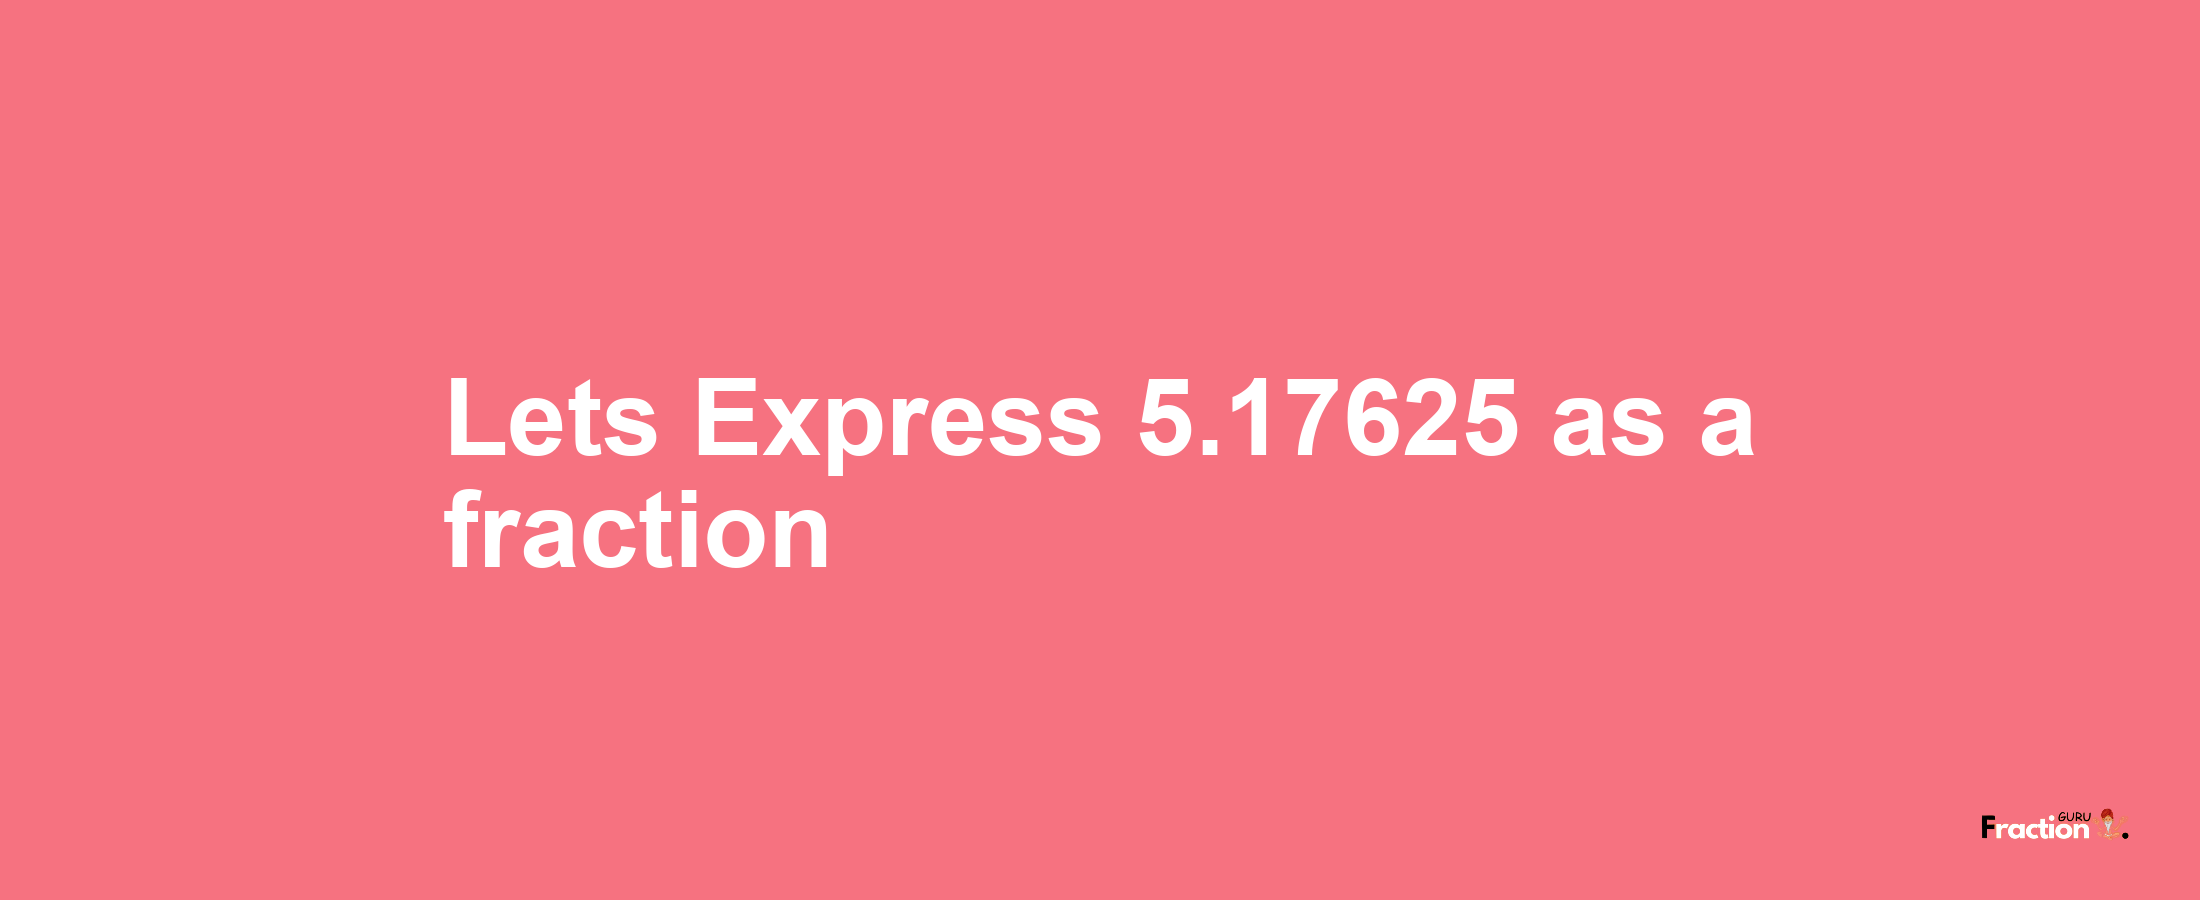 Lets Express 5.17625 as afraction